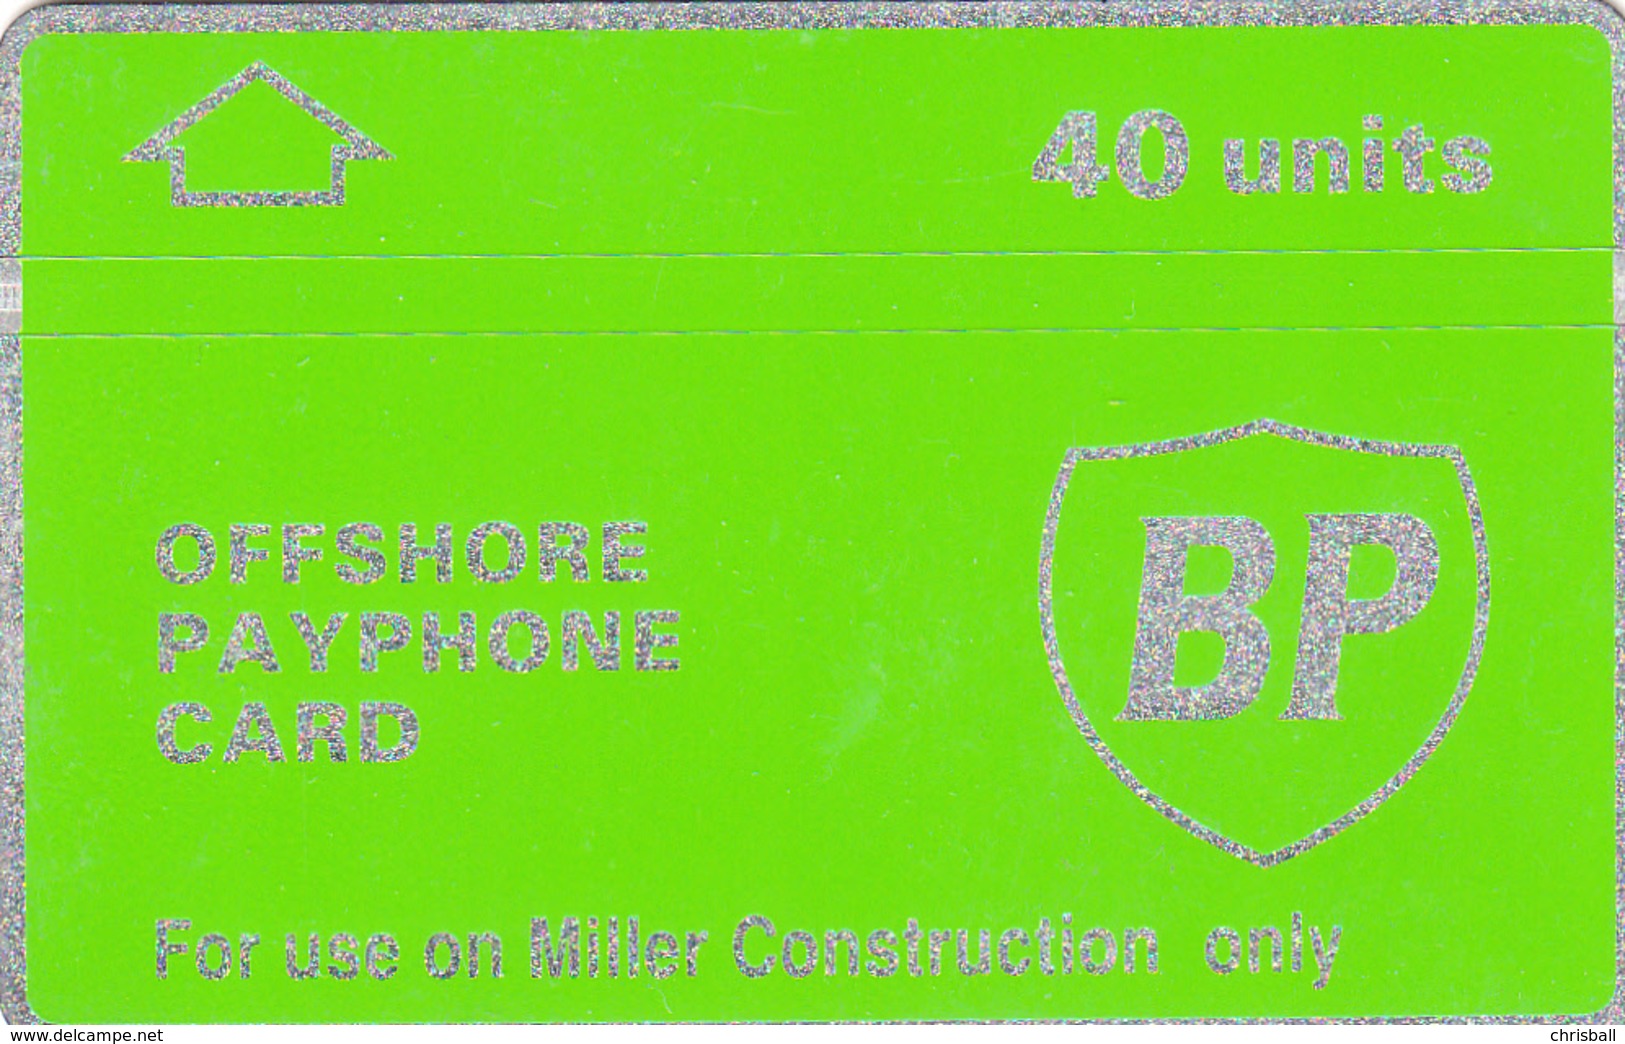 BT Oil Rig Phonecard - British Petroleum 40unit (Miller Construction Only) - Superb Fine Used Condition - [ 2] Oil Drilling Rig